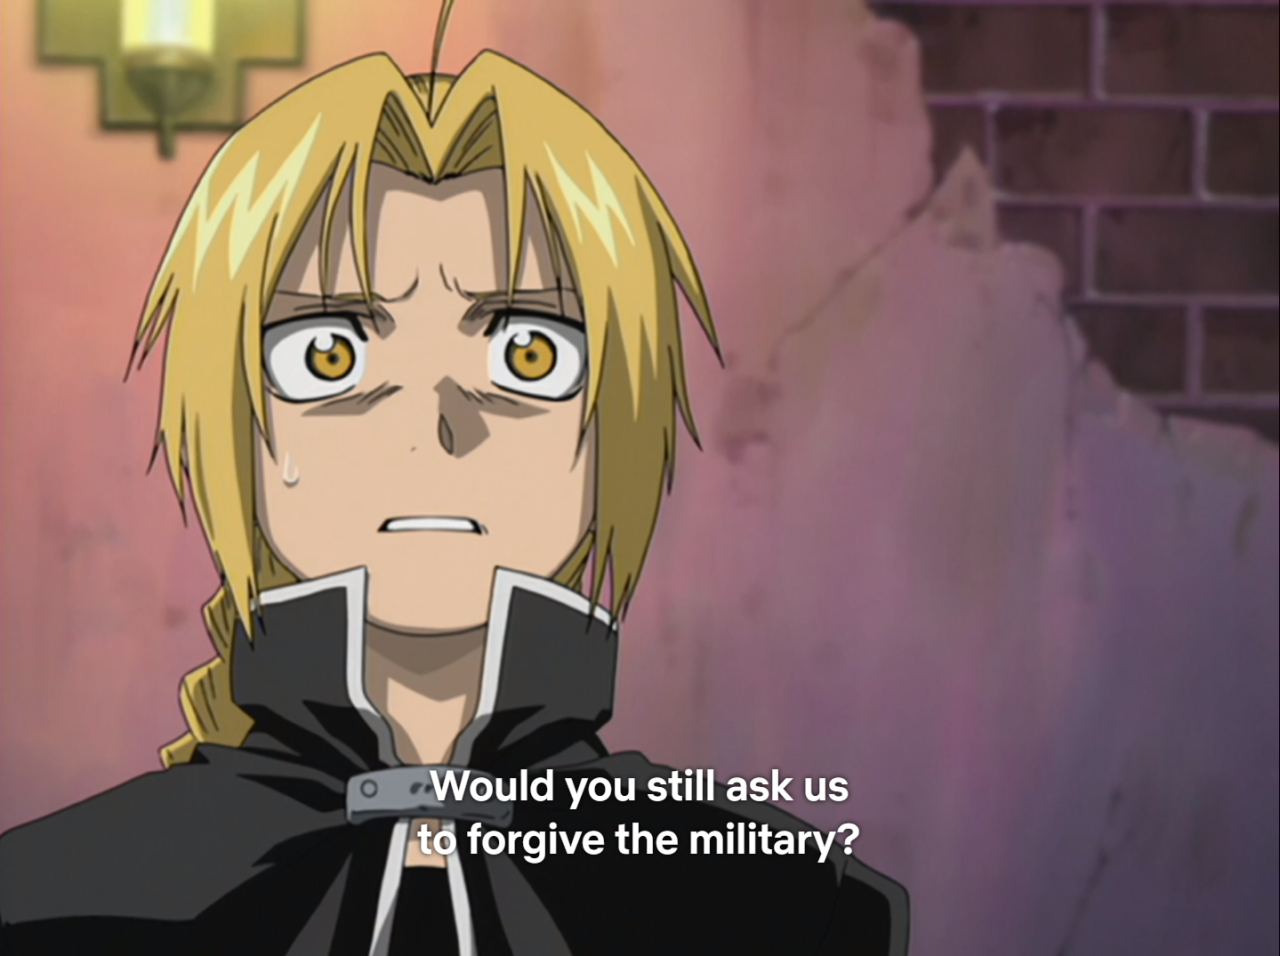 Checkmate — FMA 2003 Anime First Runthrough Thoughts So people